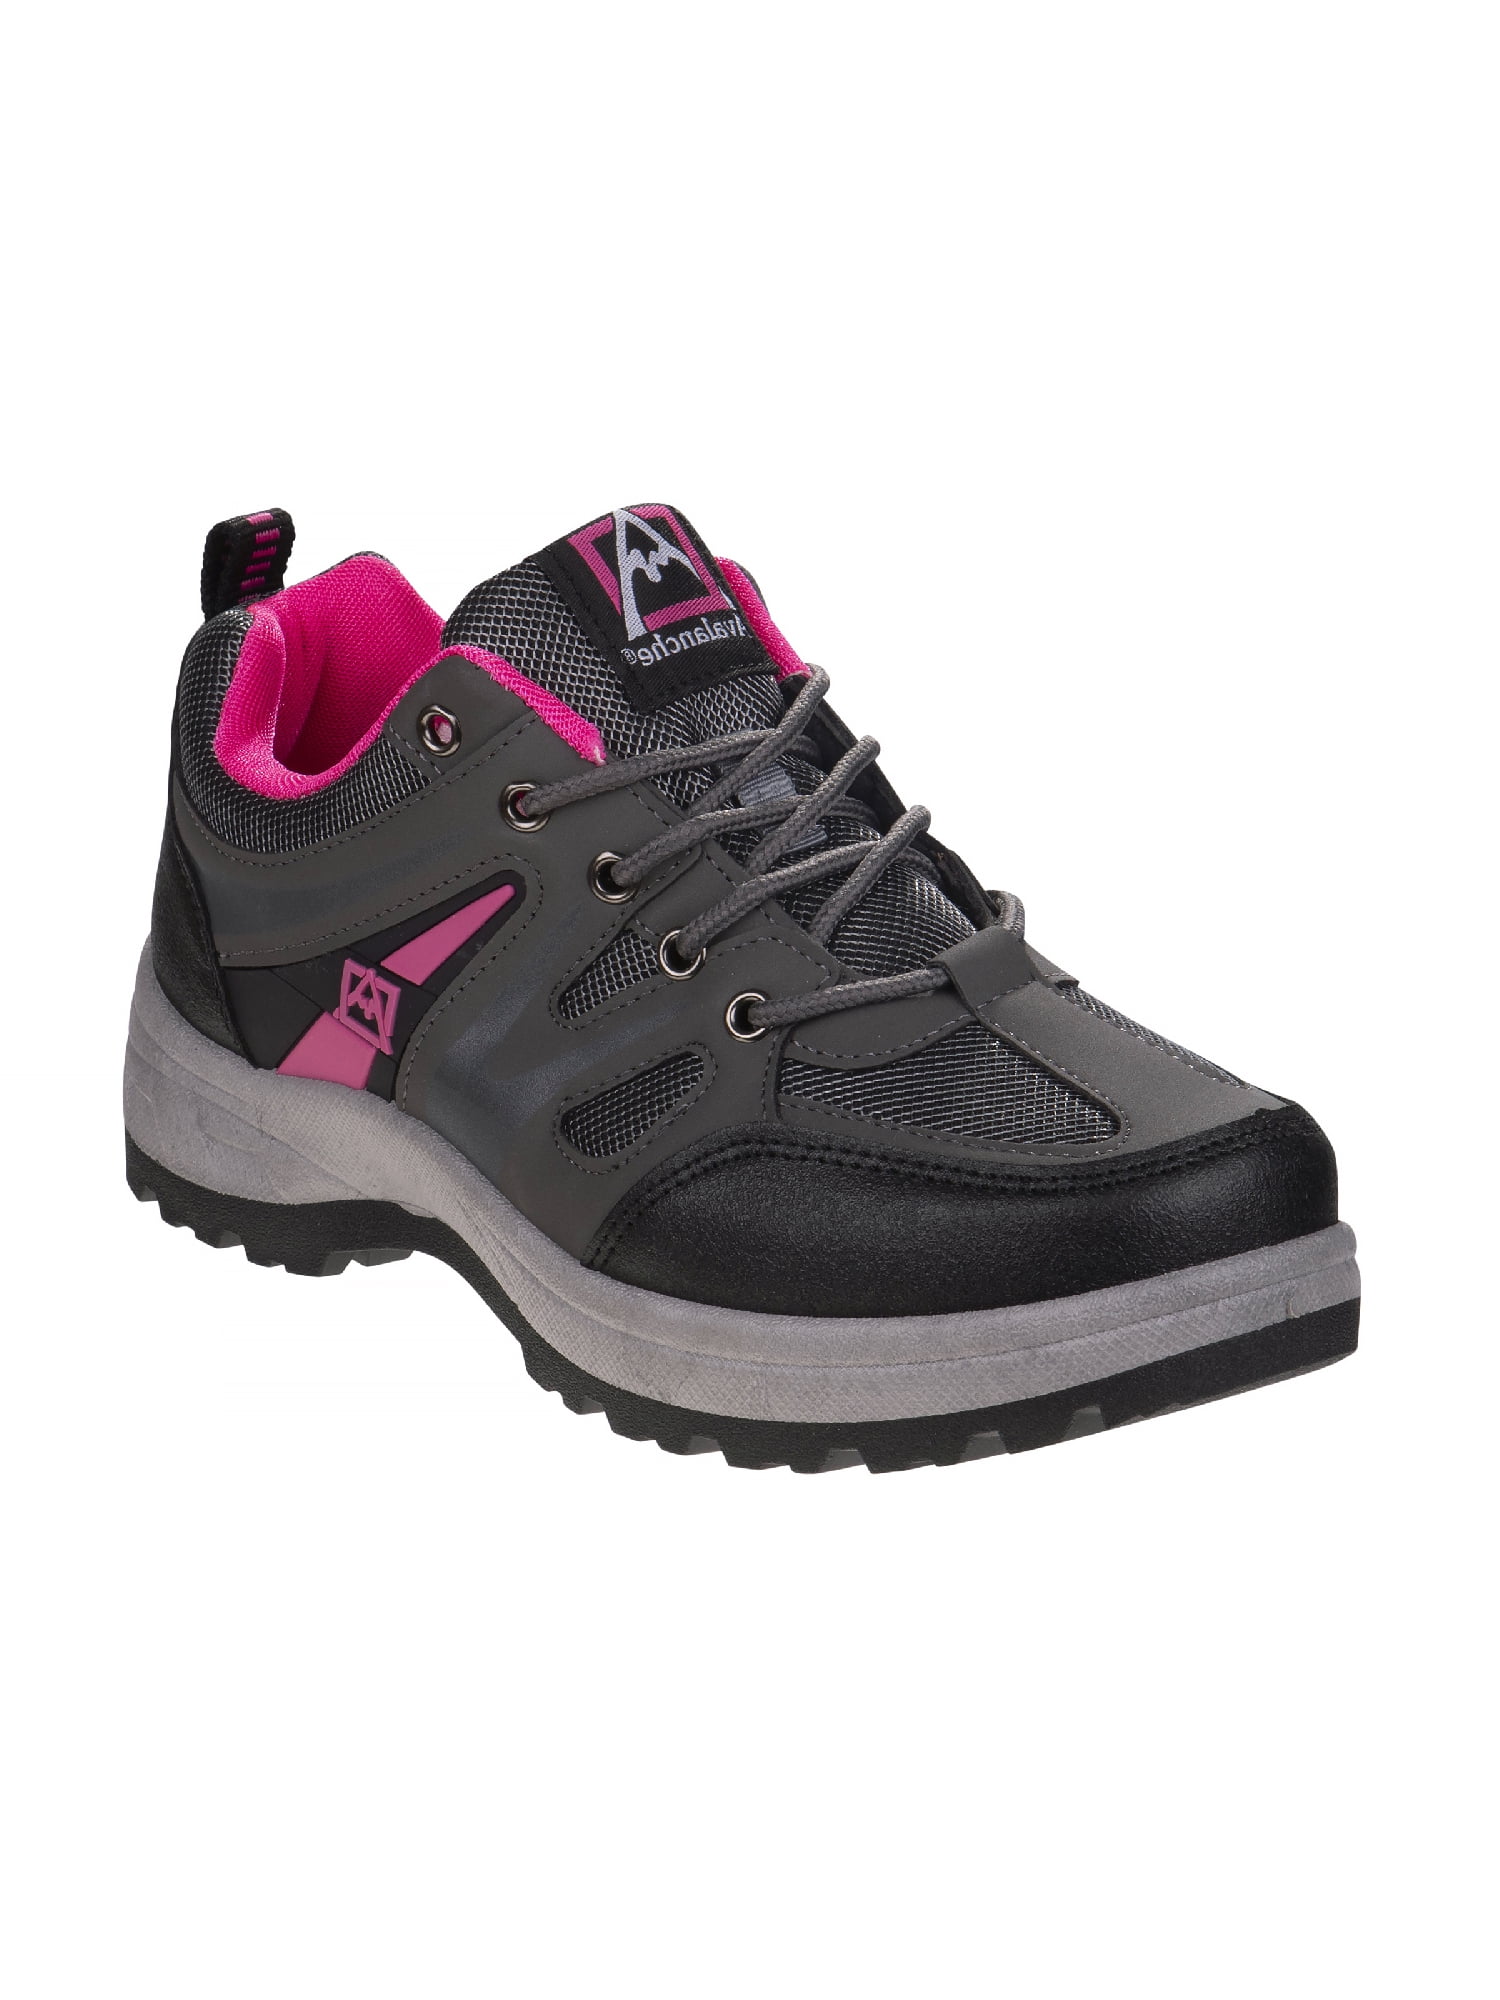 Avalanche Grey Pink Outdoor Lace Up Hiking Sneakers Adult Womens ...